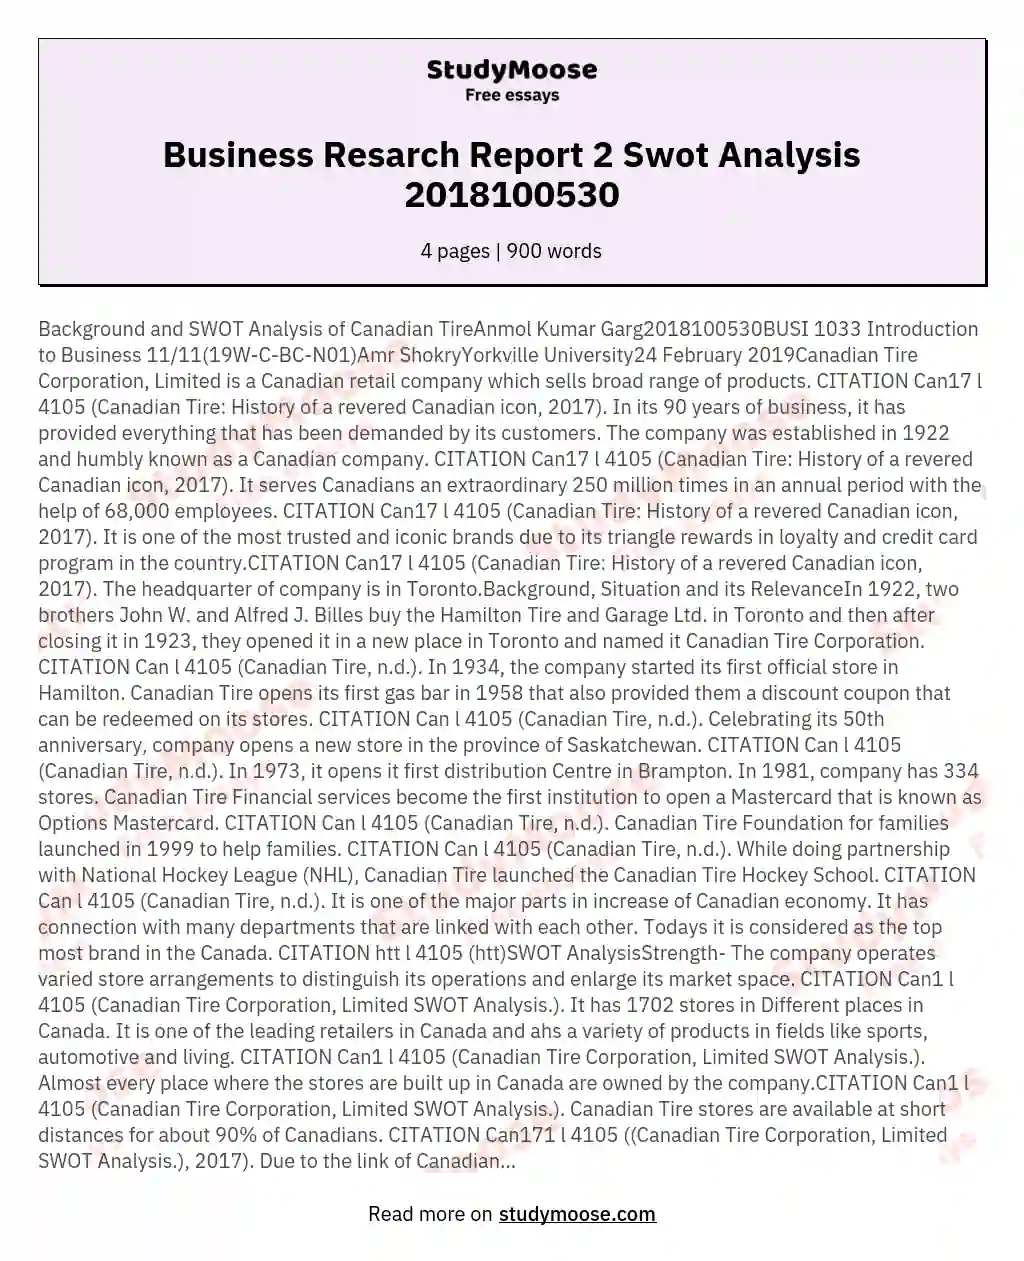 Business Resarch Report 2 Swot Analysis 2018100530 essay